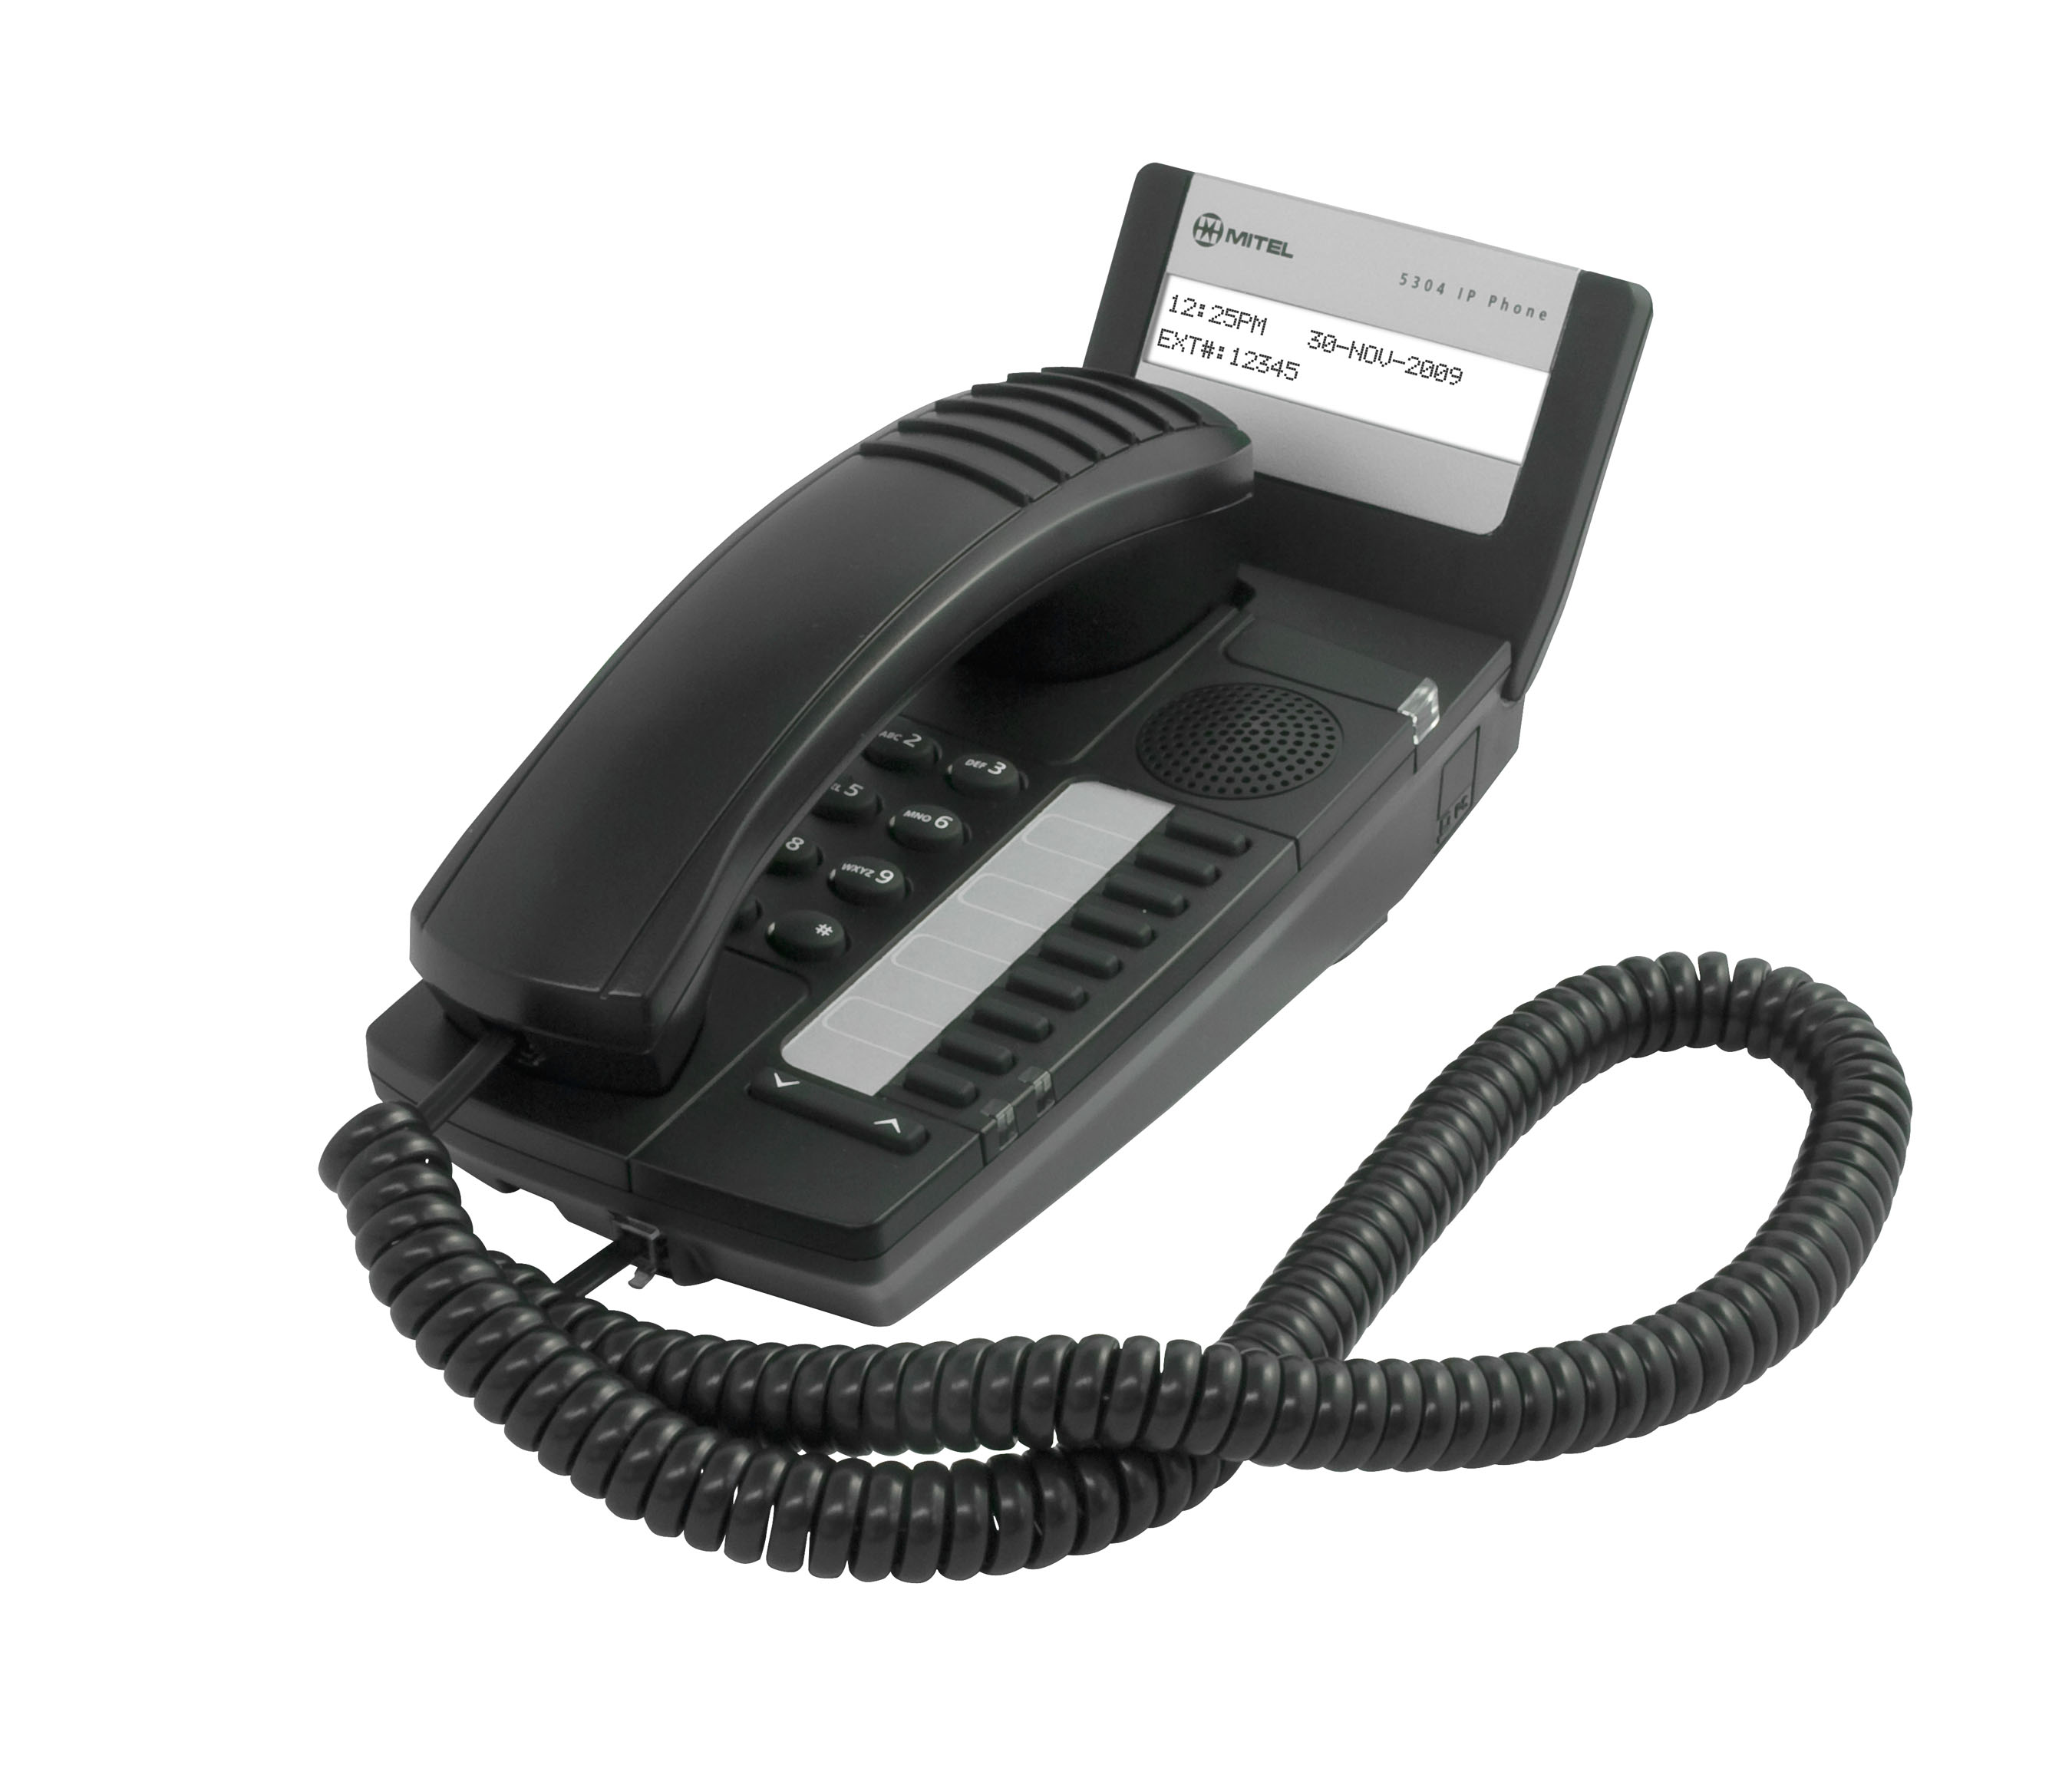 Mitel Model 5304 Utility, Convenience and Courtesy IP Telephone